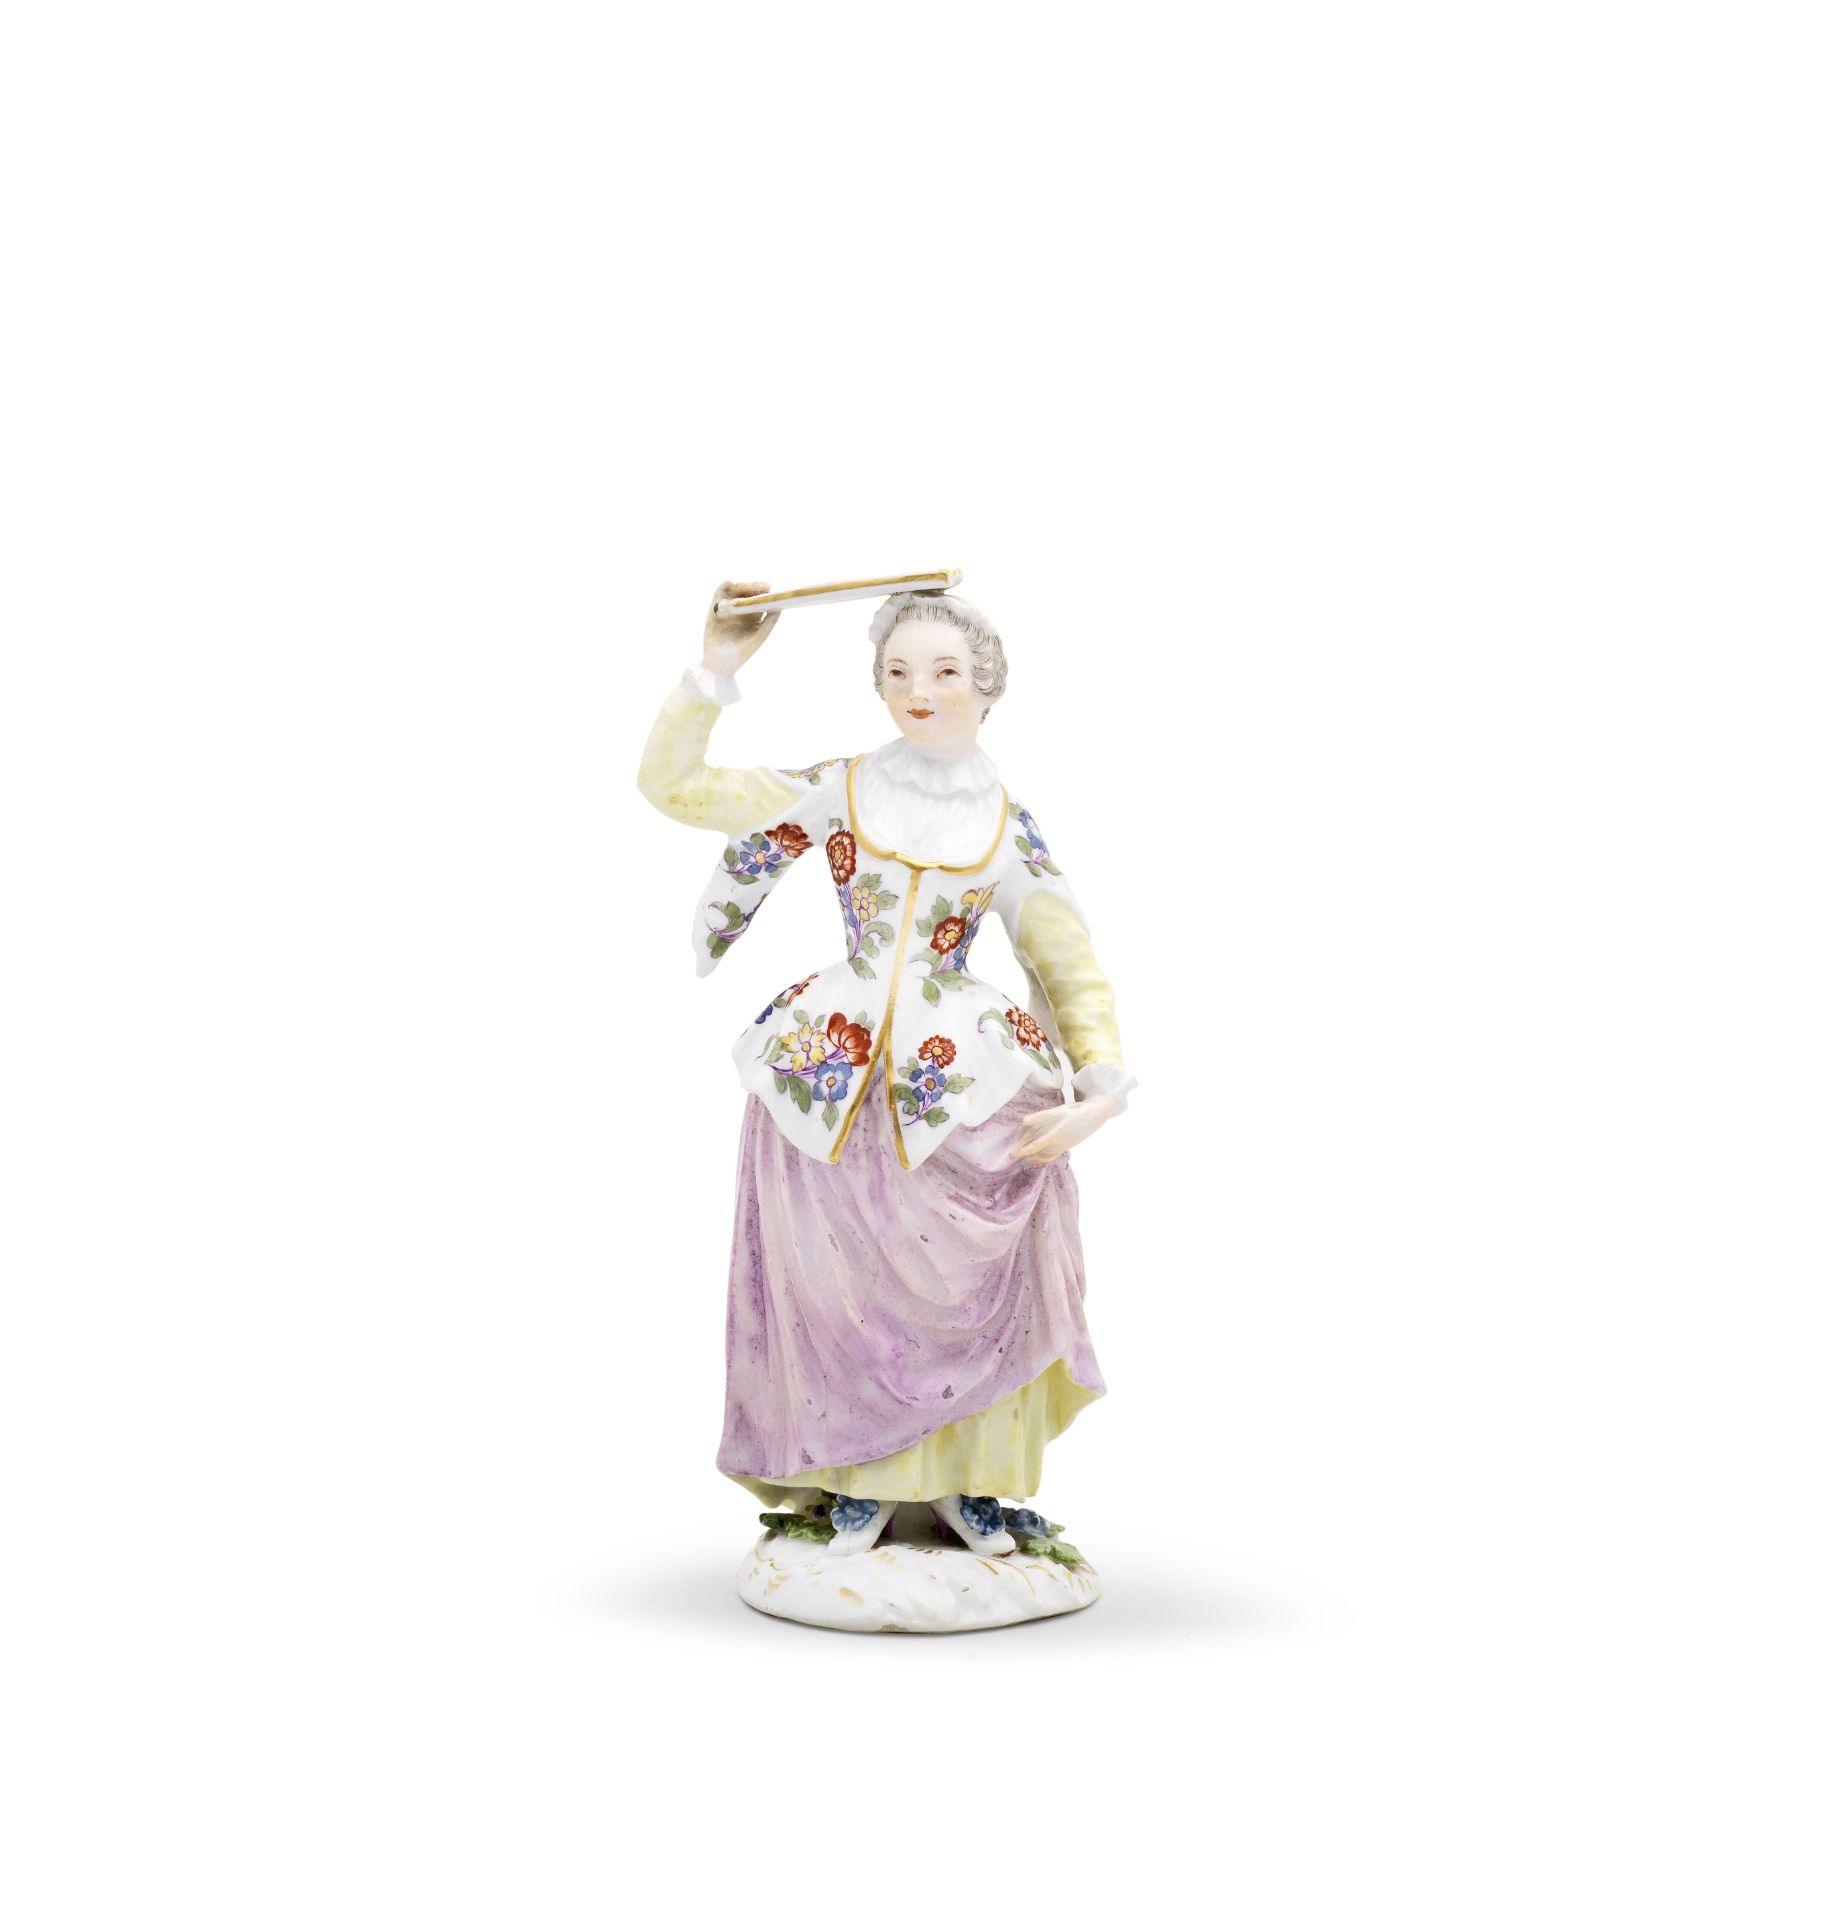 A Meissen figure of a lady with a fan, mid 18th century